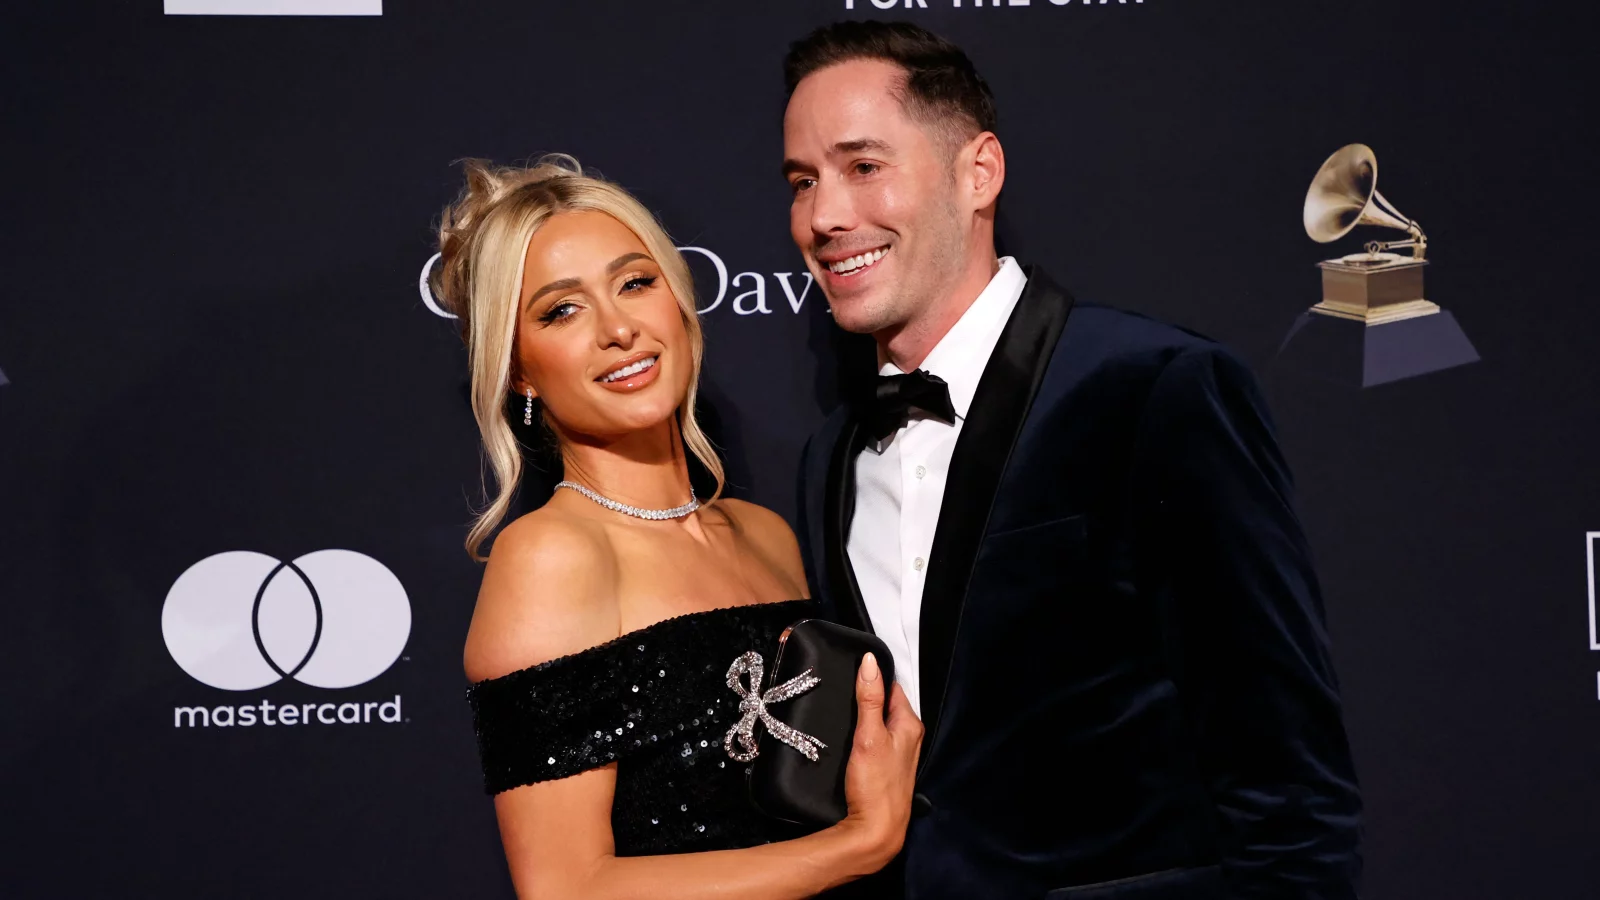 Paris Hilton and Carter Reum Have Parents' Night Out at Grammys 2023 Weeks After Welcoming Son